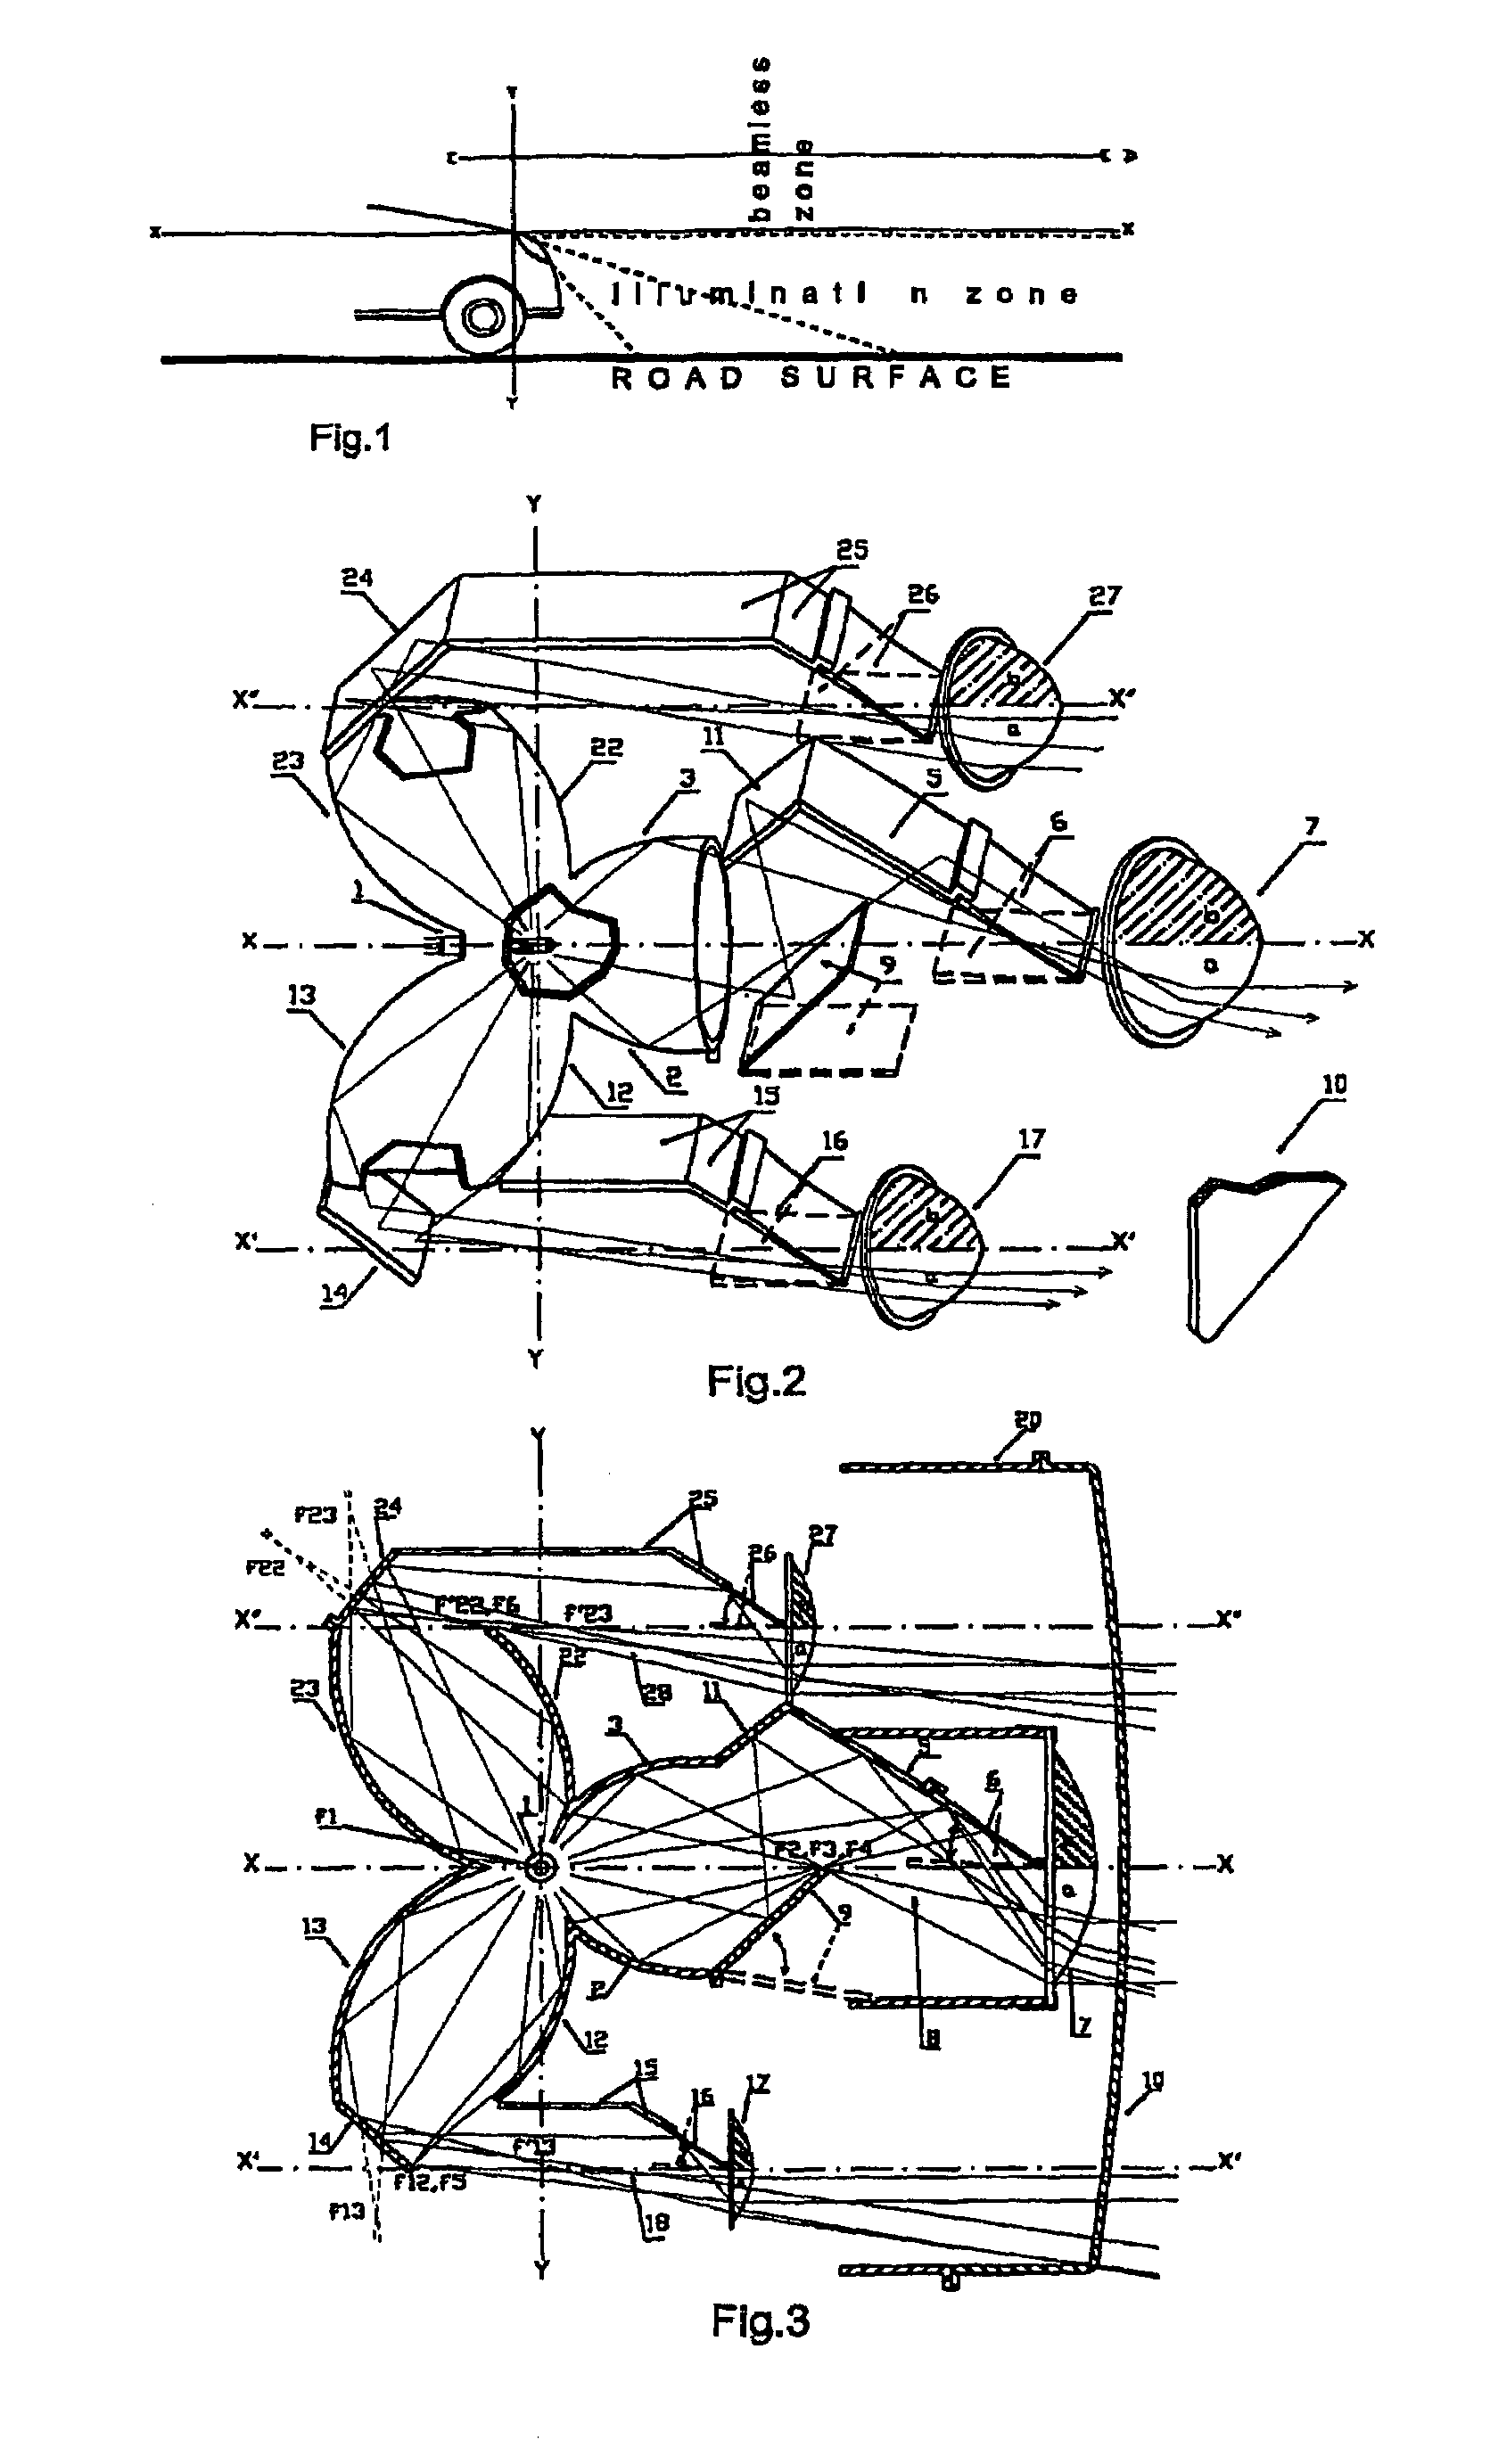 Headlamp with a continuous long-distance illumination without glaring effects